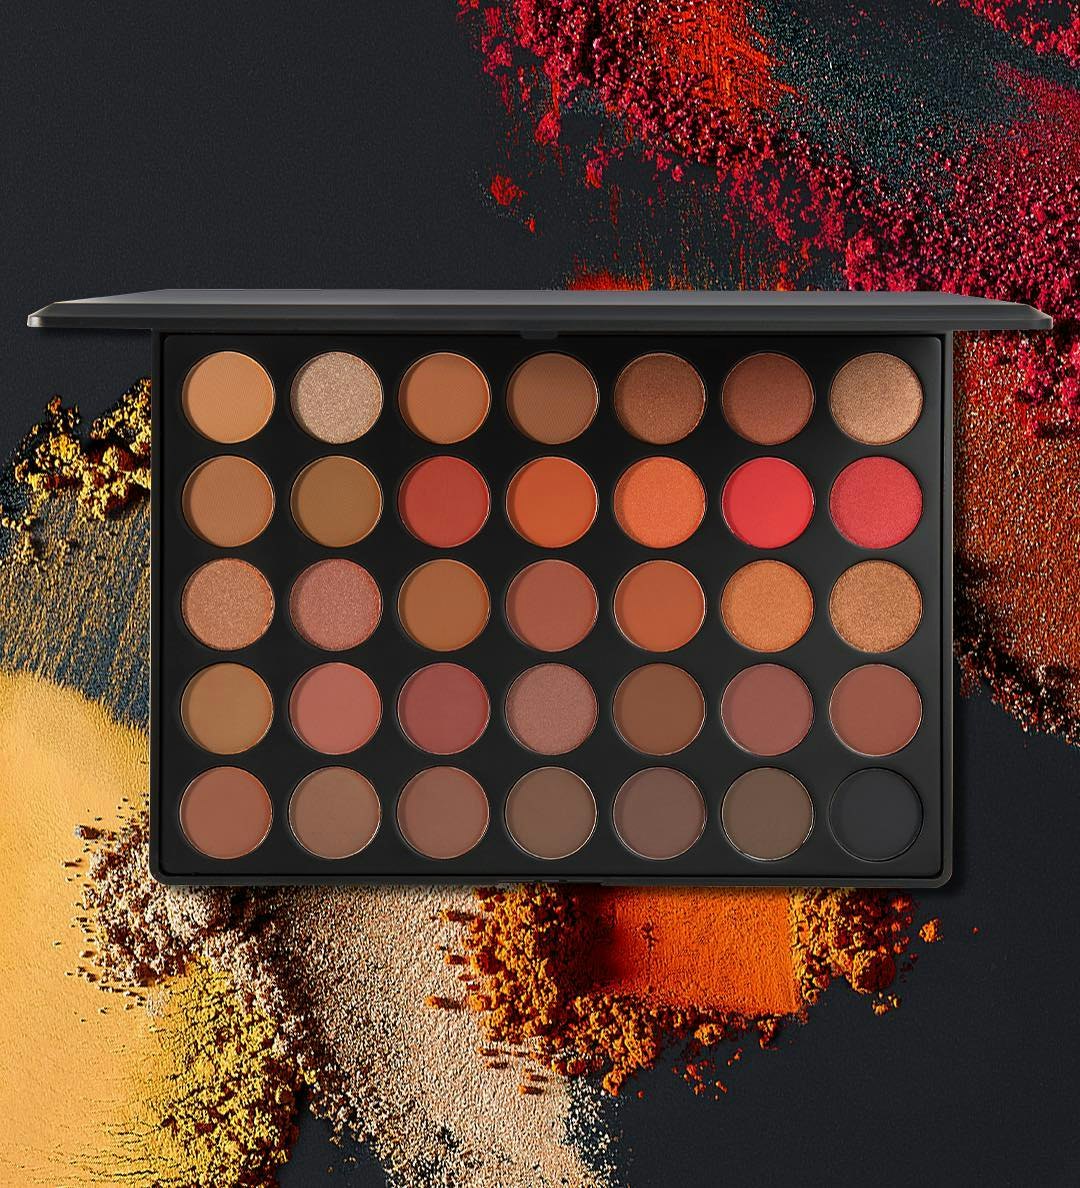 9 Morphe 35O2 Palette Tutorials That Will Make You Buy This Dreamy